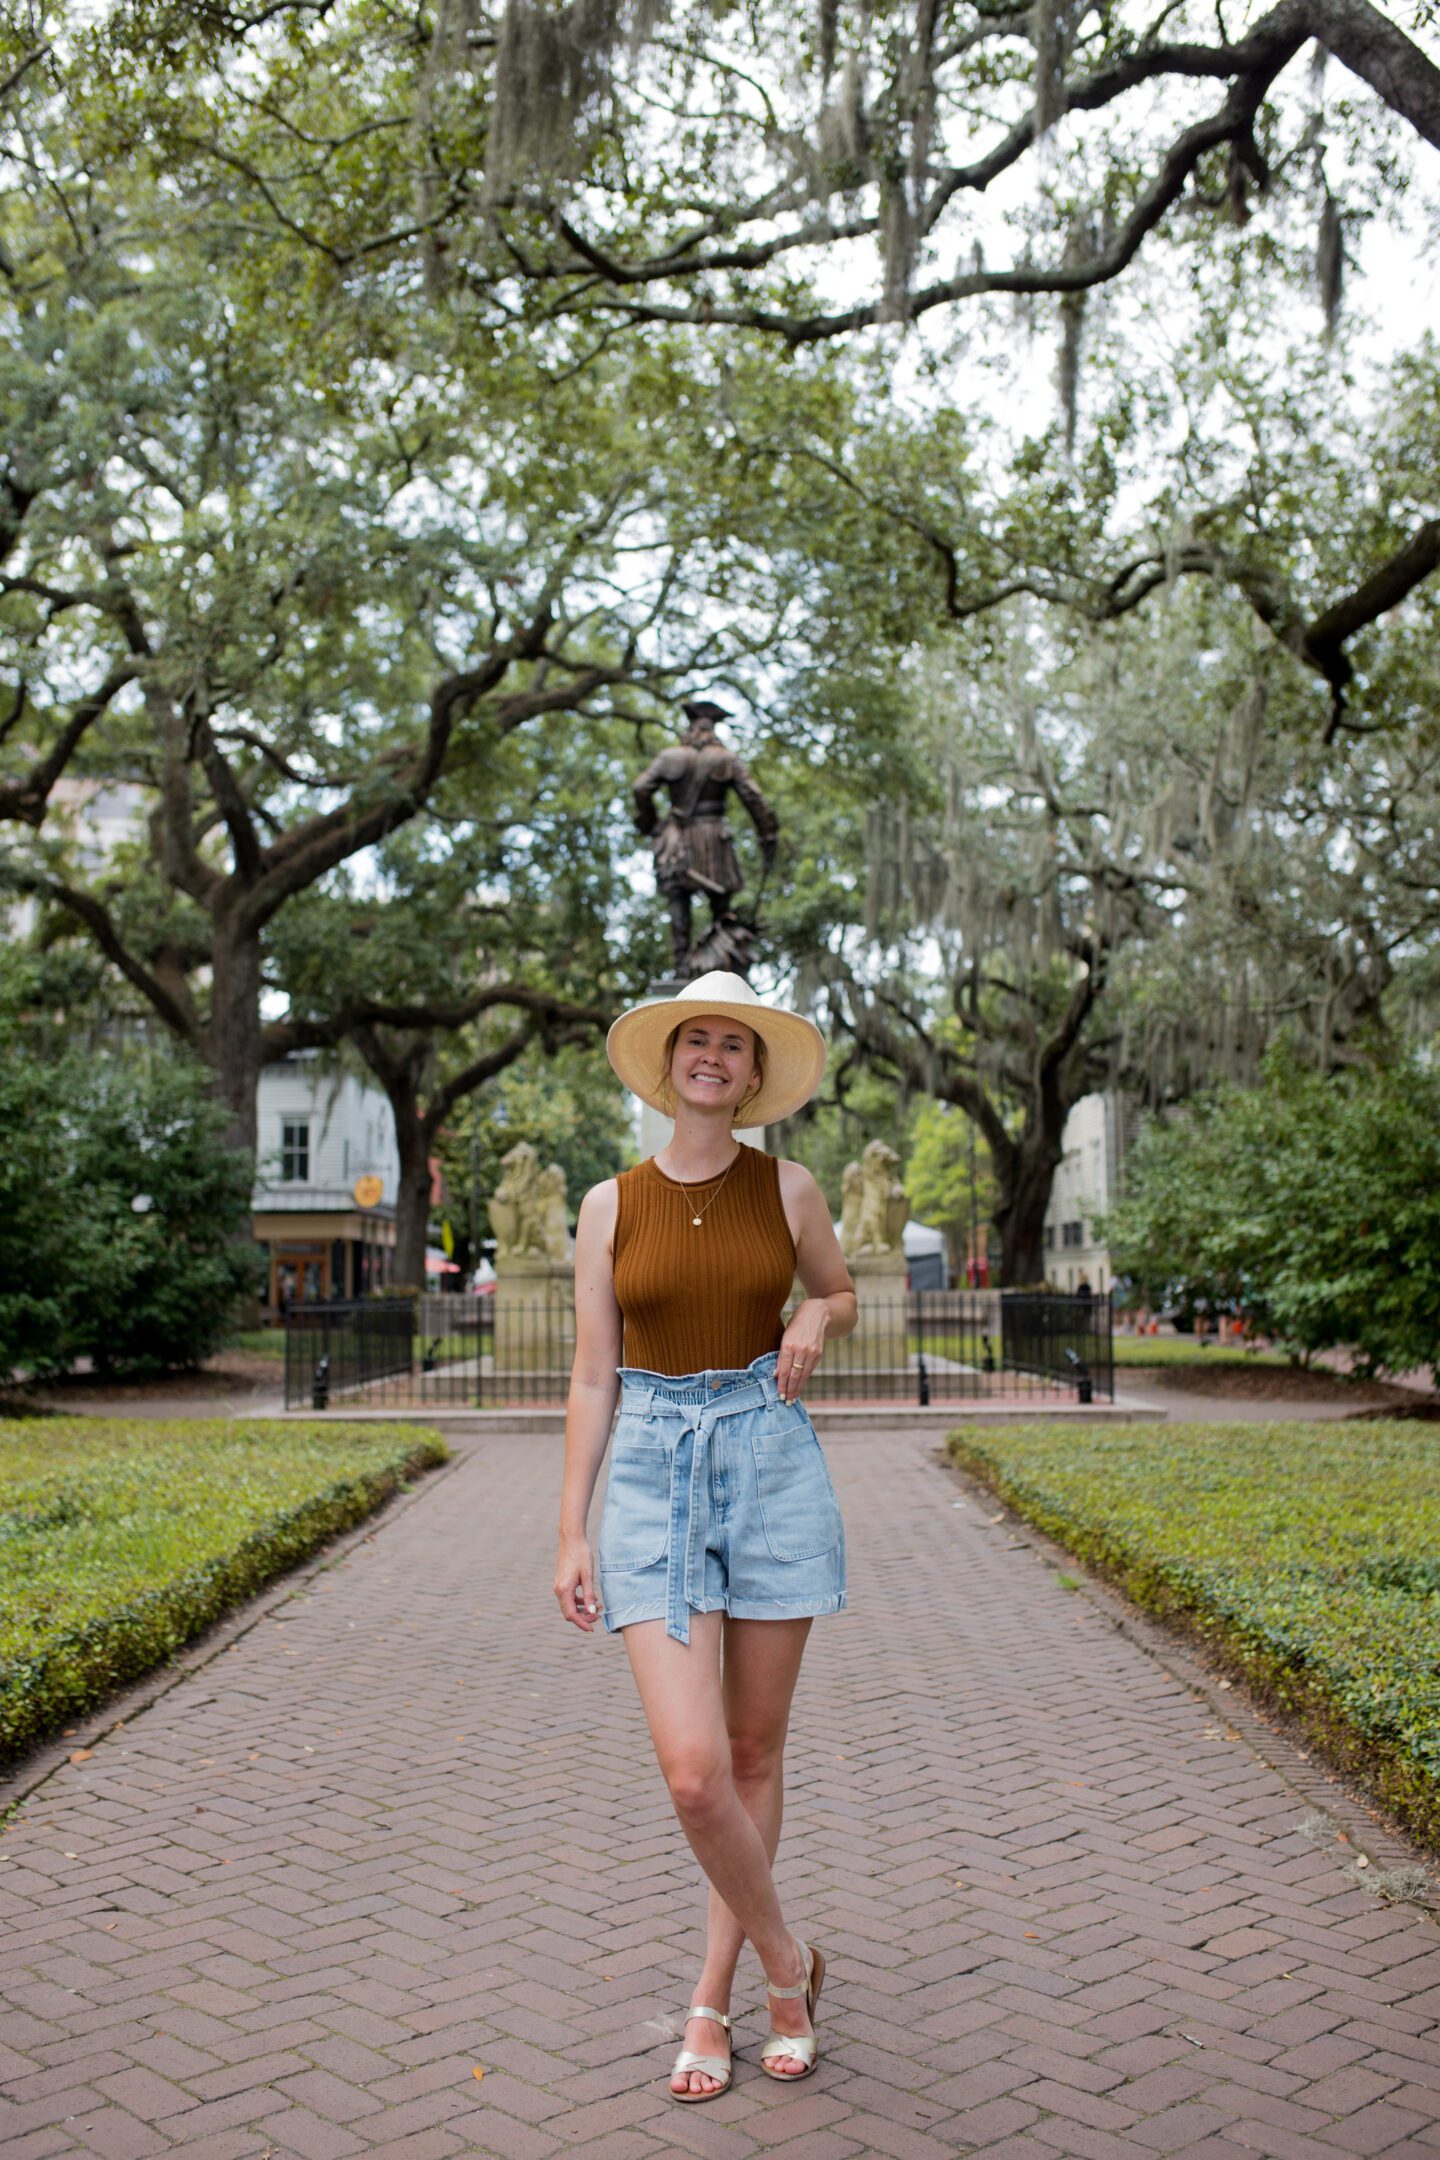 Girl standing in front of a statue, Savannah Georgia